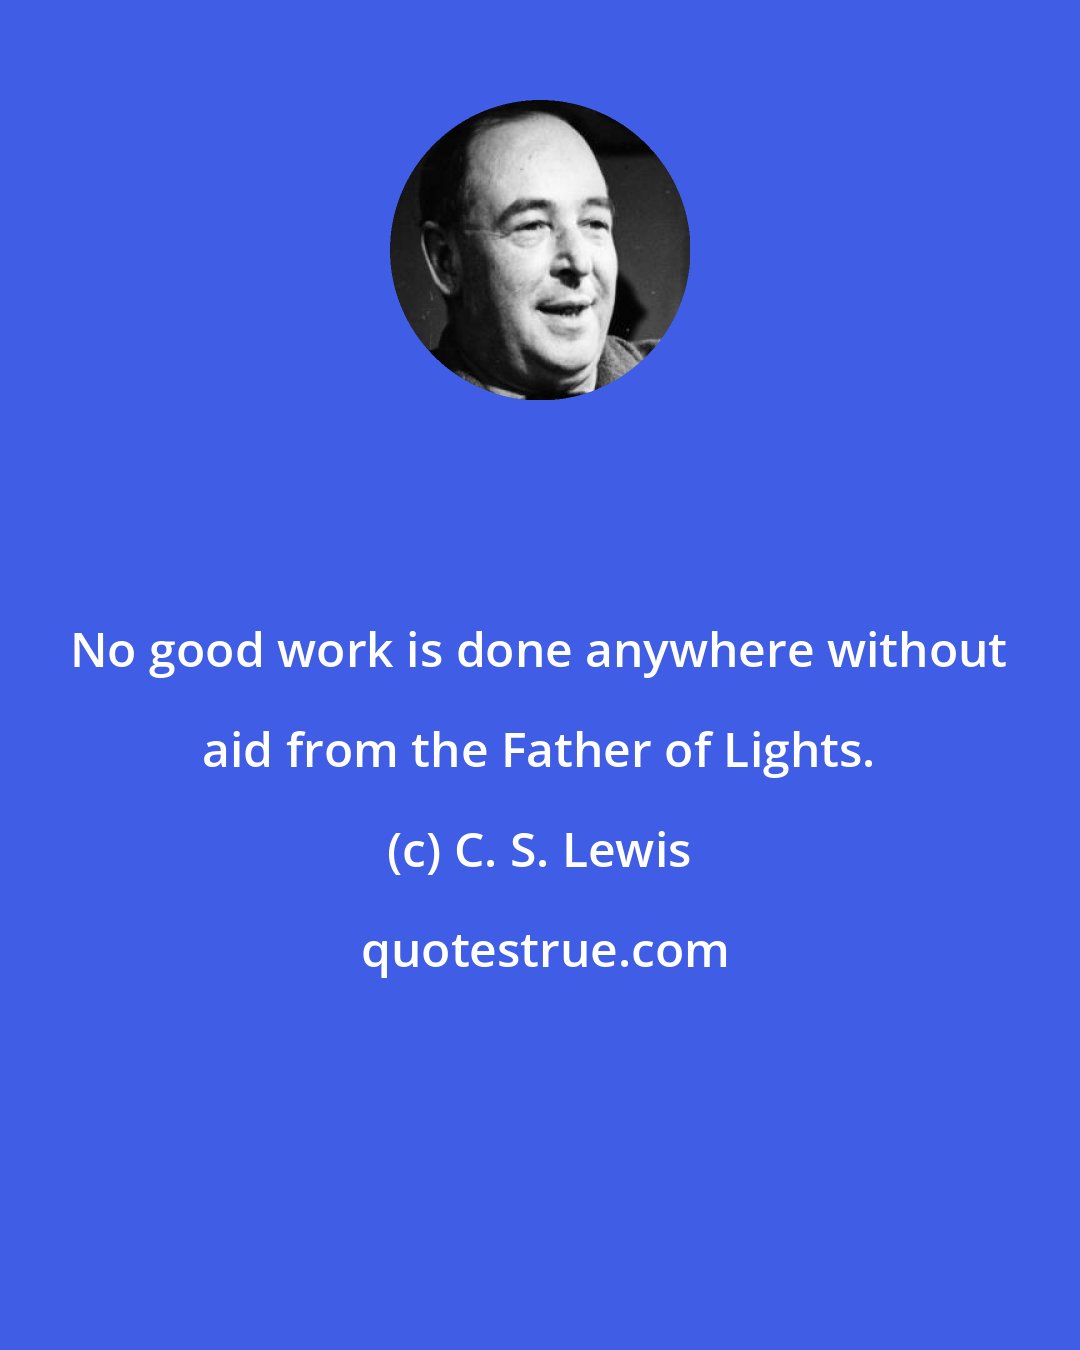 C. S. Lewis: No good work is done anywhere without aid from the Father of Lights.